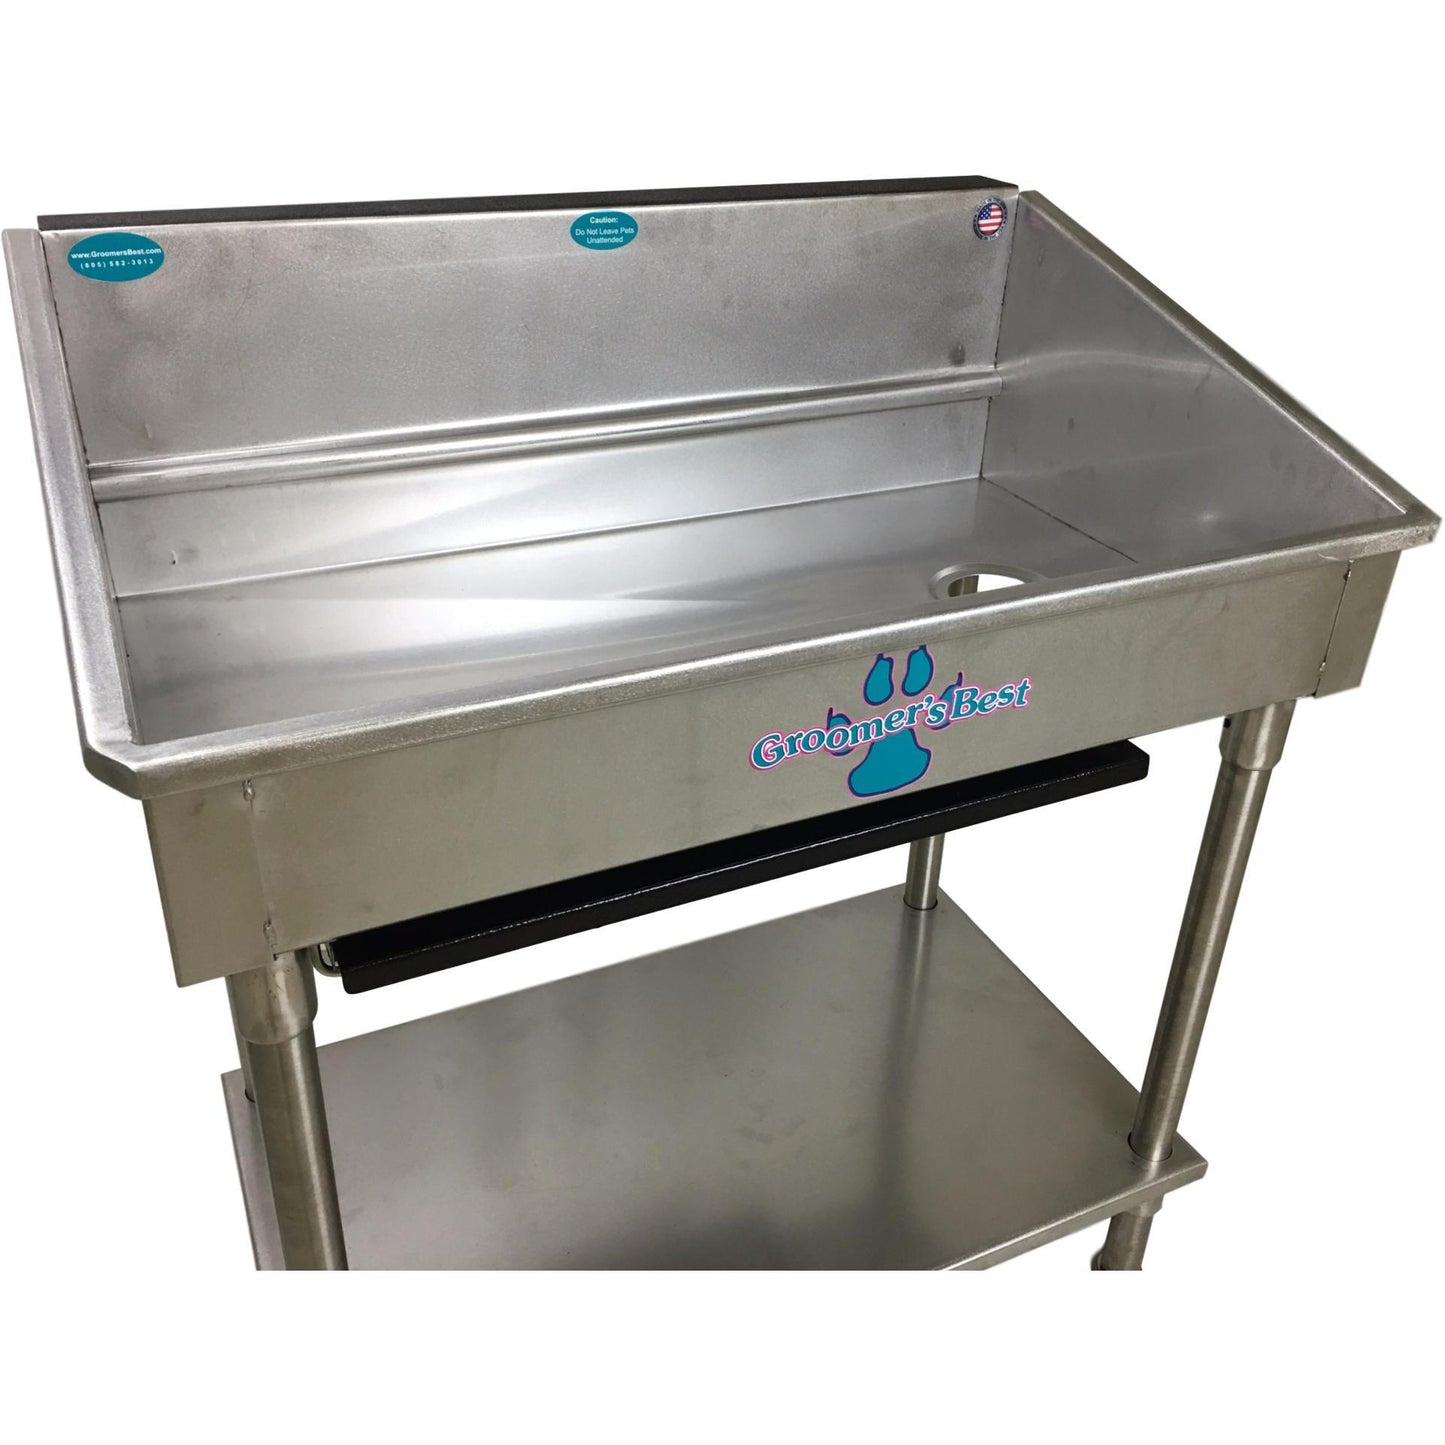 Groomer's Best Shallow Utility Sink-Grooming Tub-Pet's Choice Supply